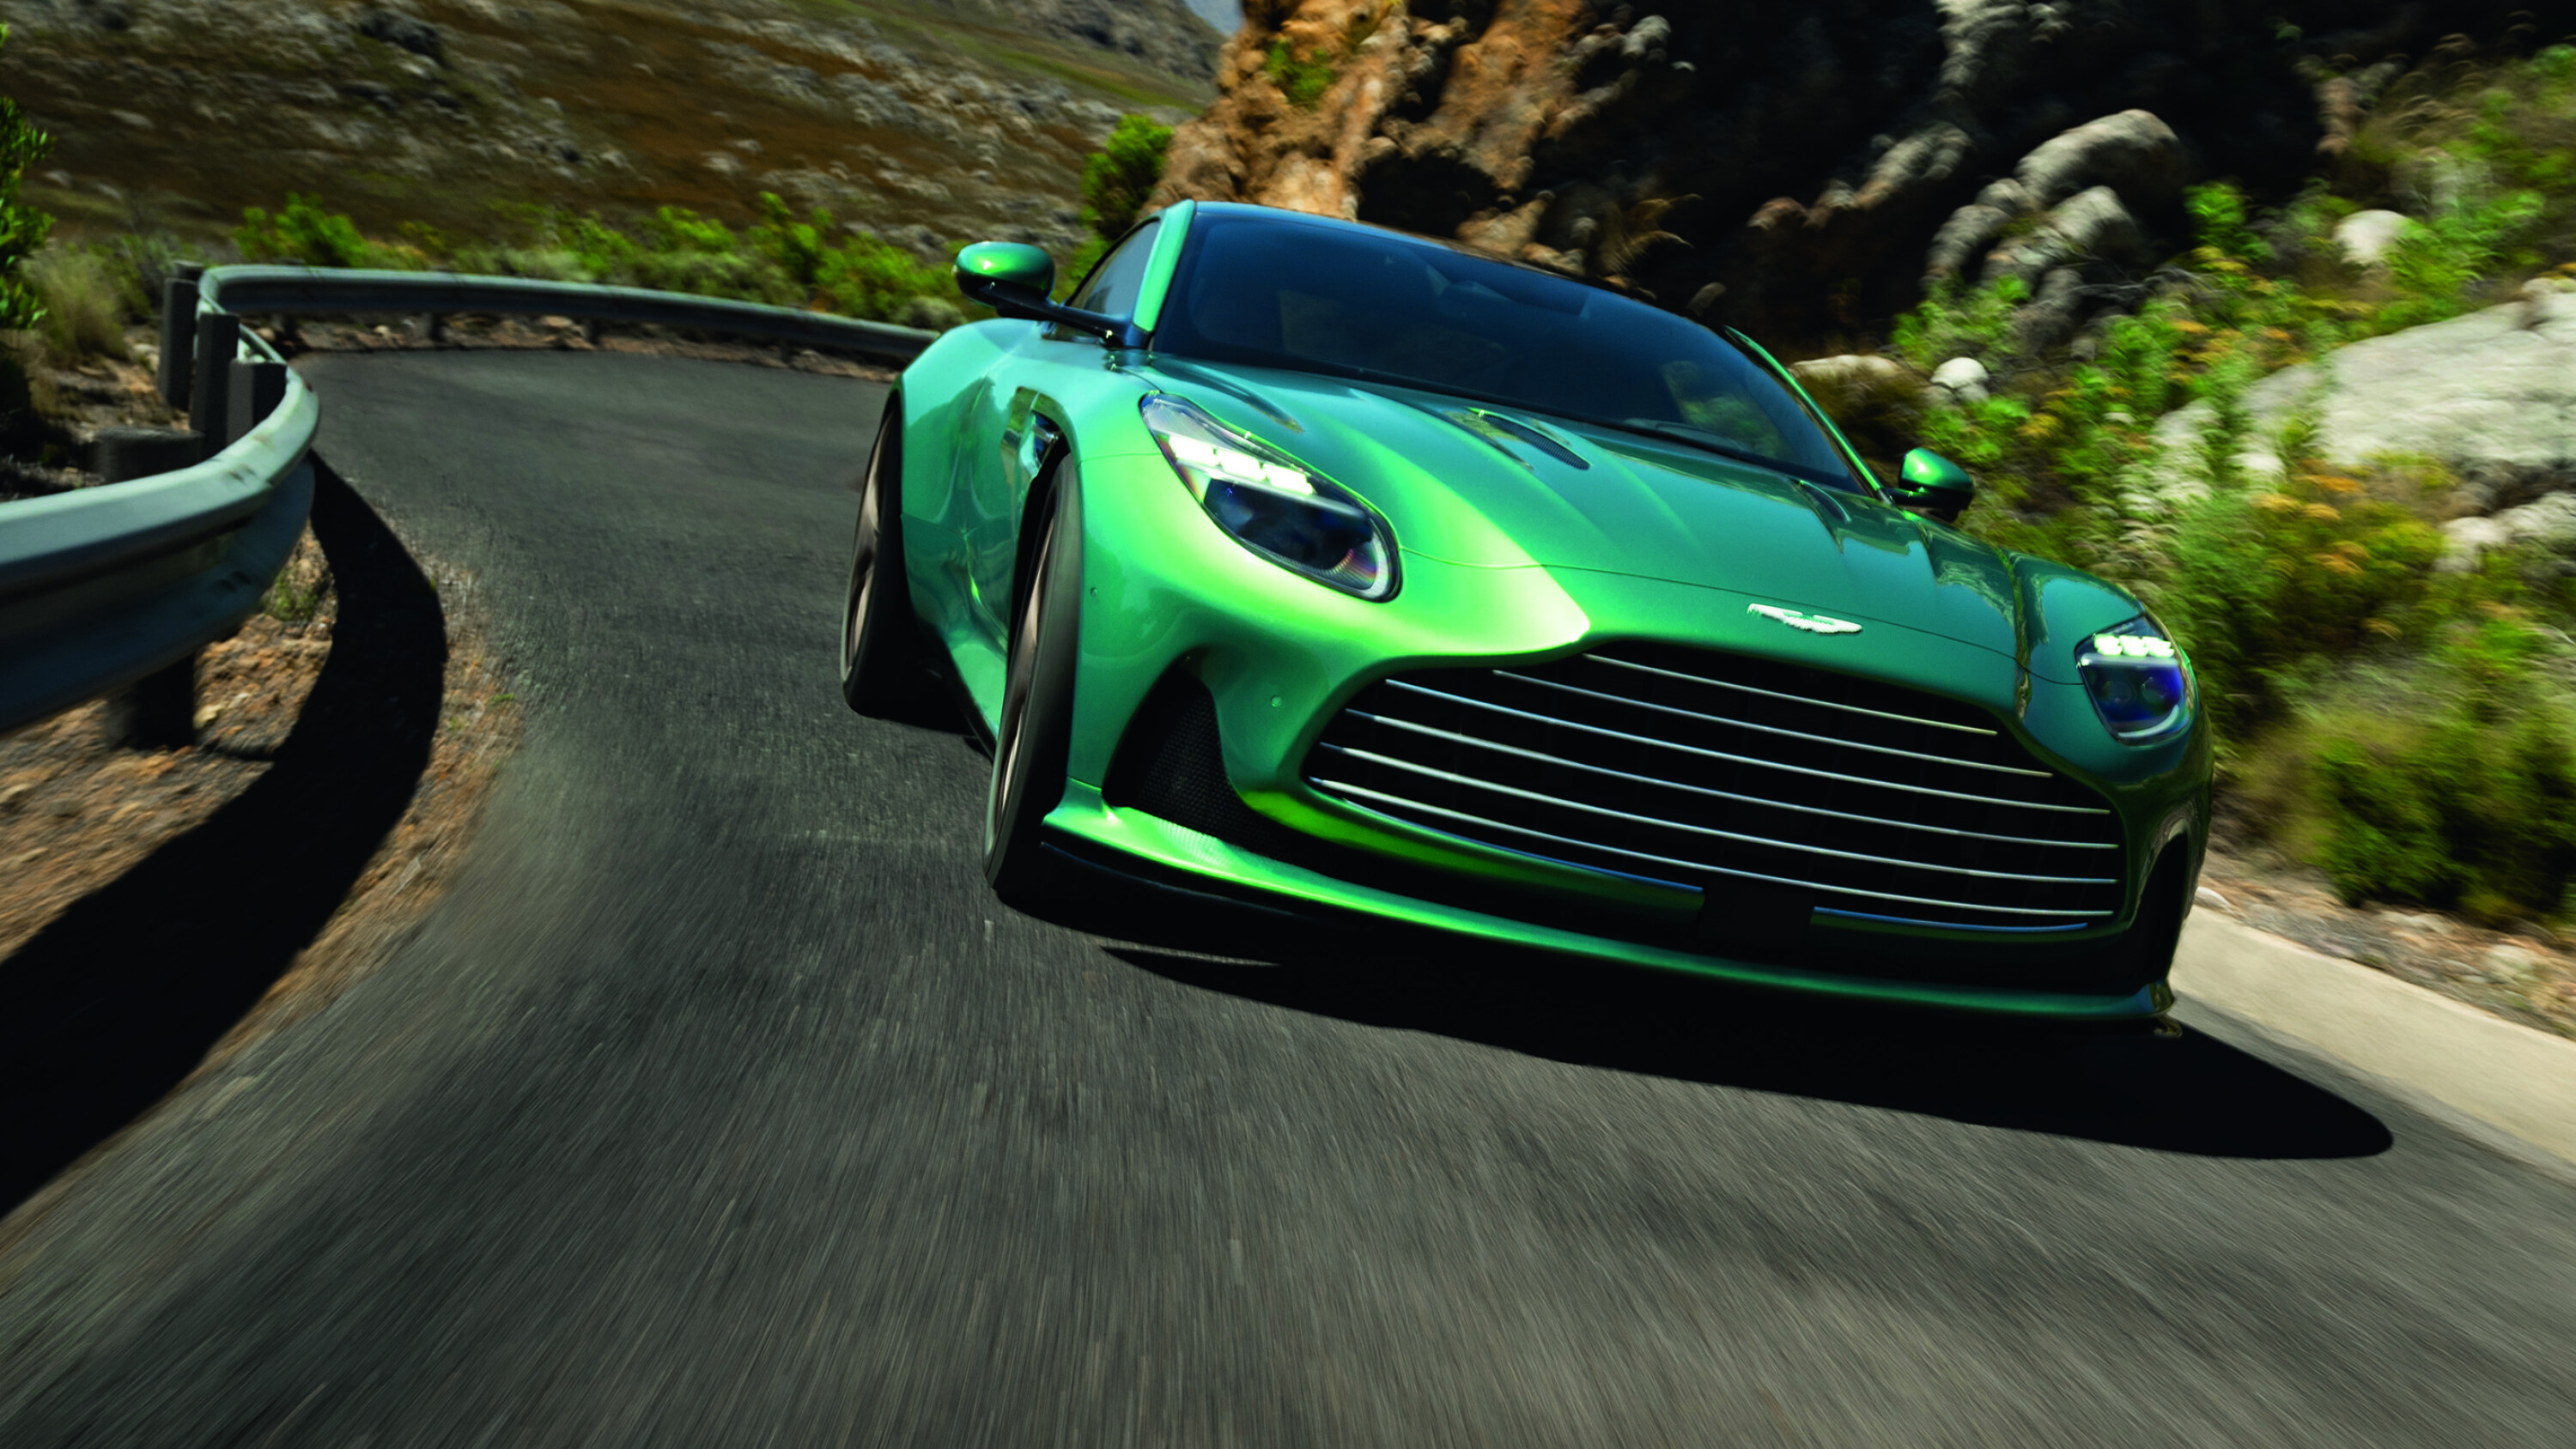 Aston Martin Reveals Plans For The Next Five Years, Vantage Successors Will  Attend?